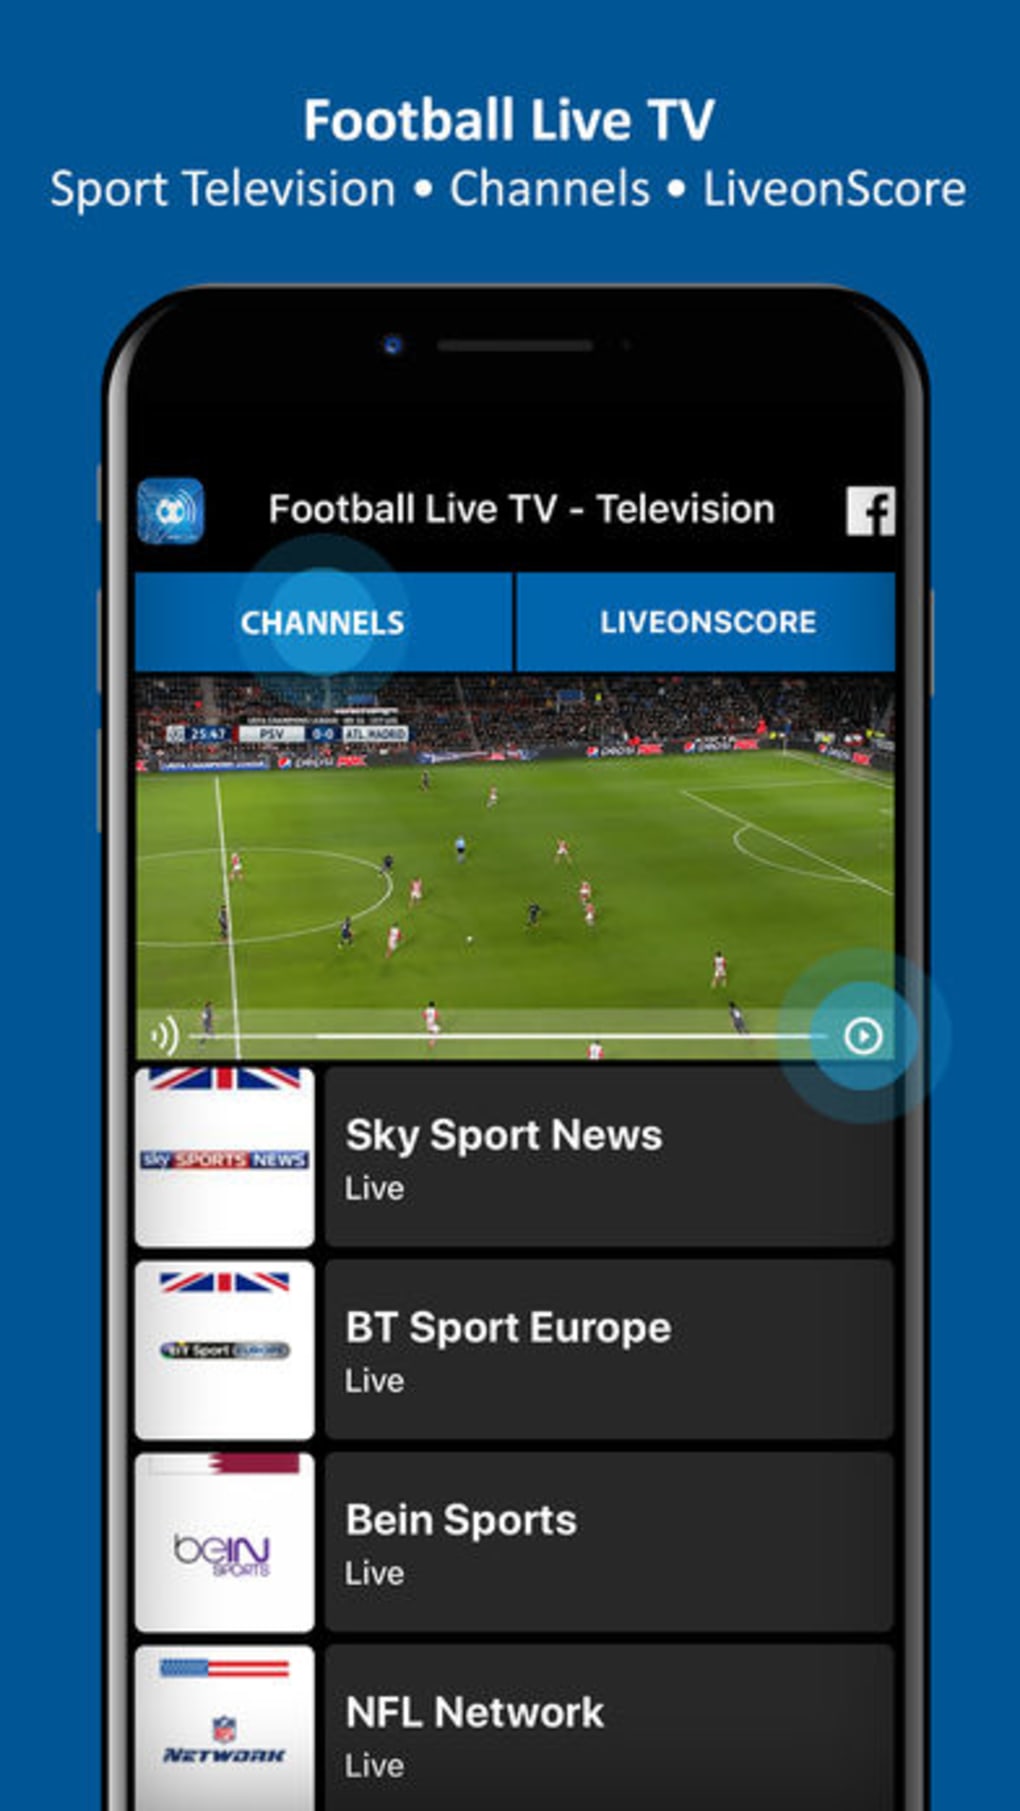 Football Live TV - Soccer TV for iPhone